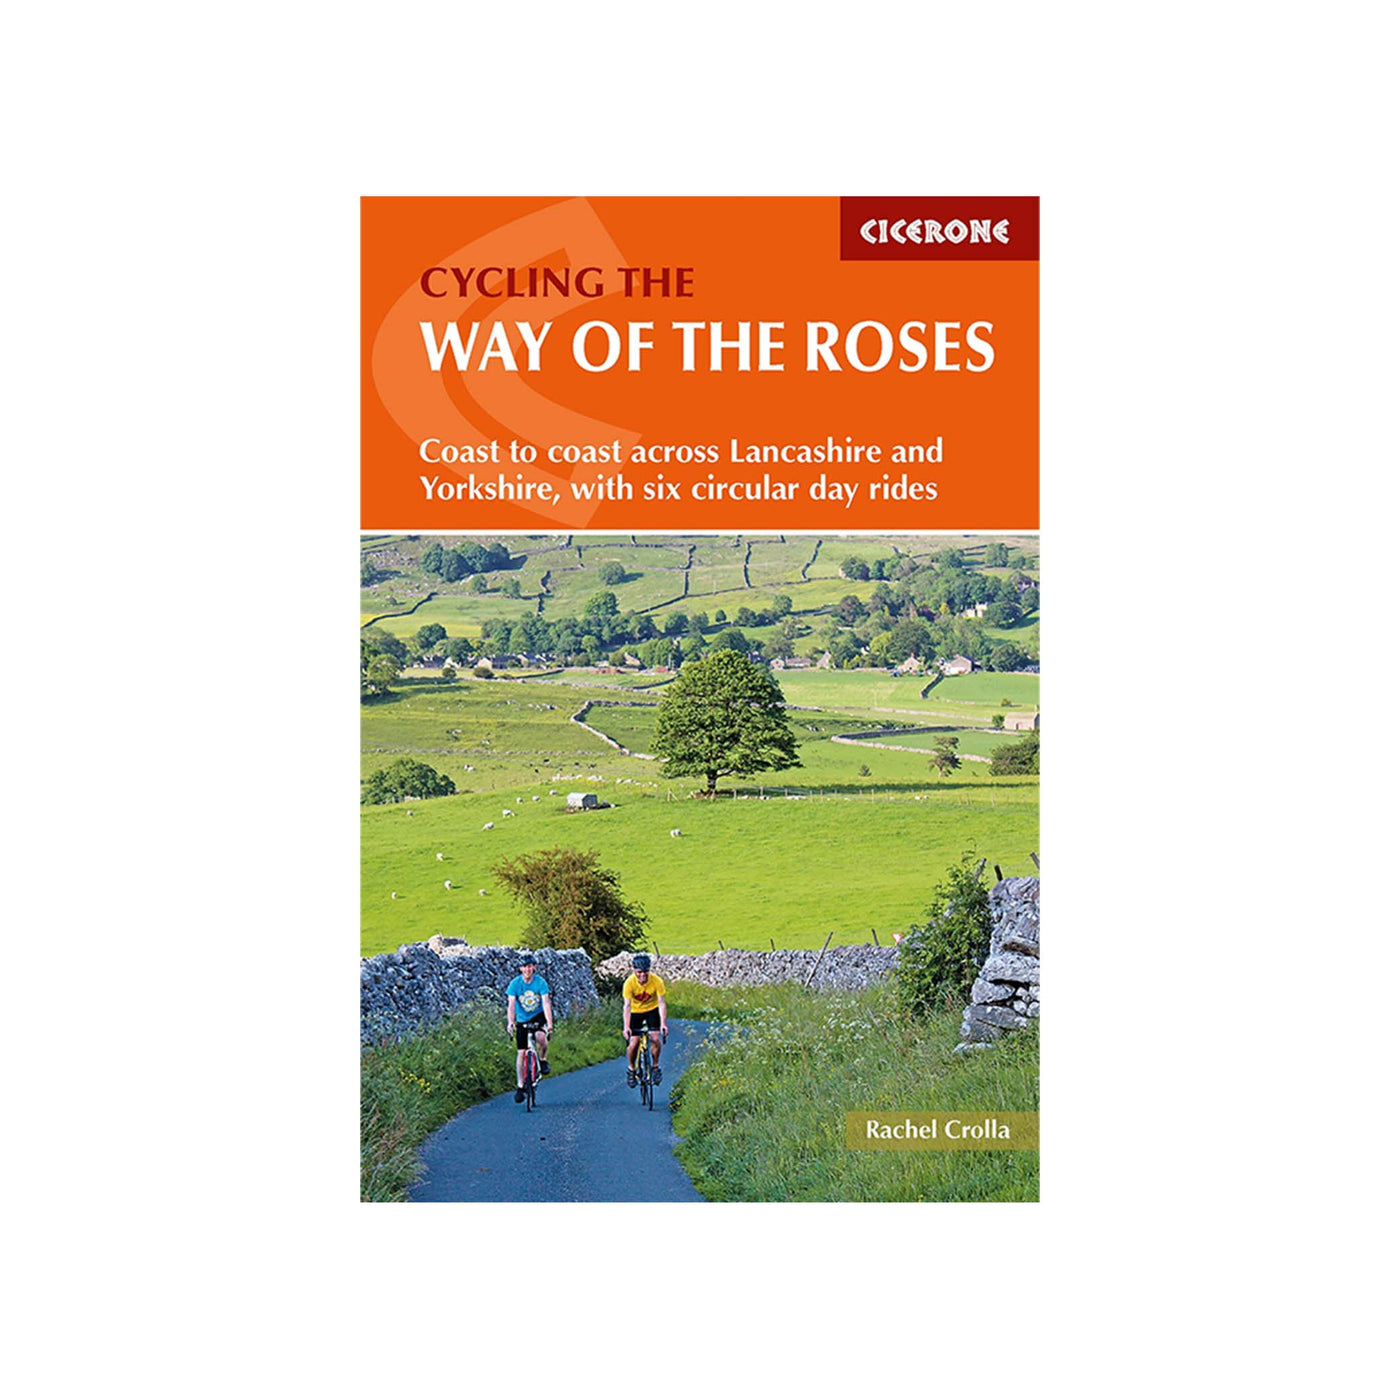 Cycling the Way of the Roses guidebook by Cicerone. Author: Rachel Crulla